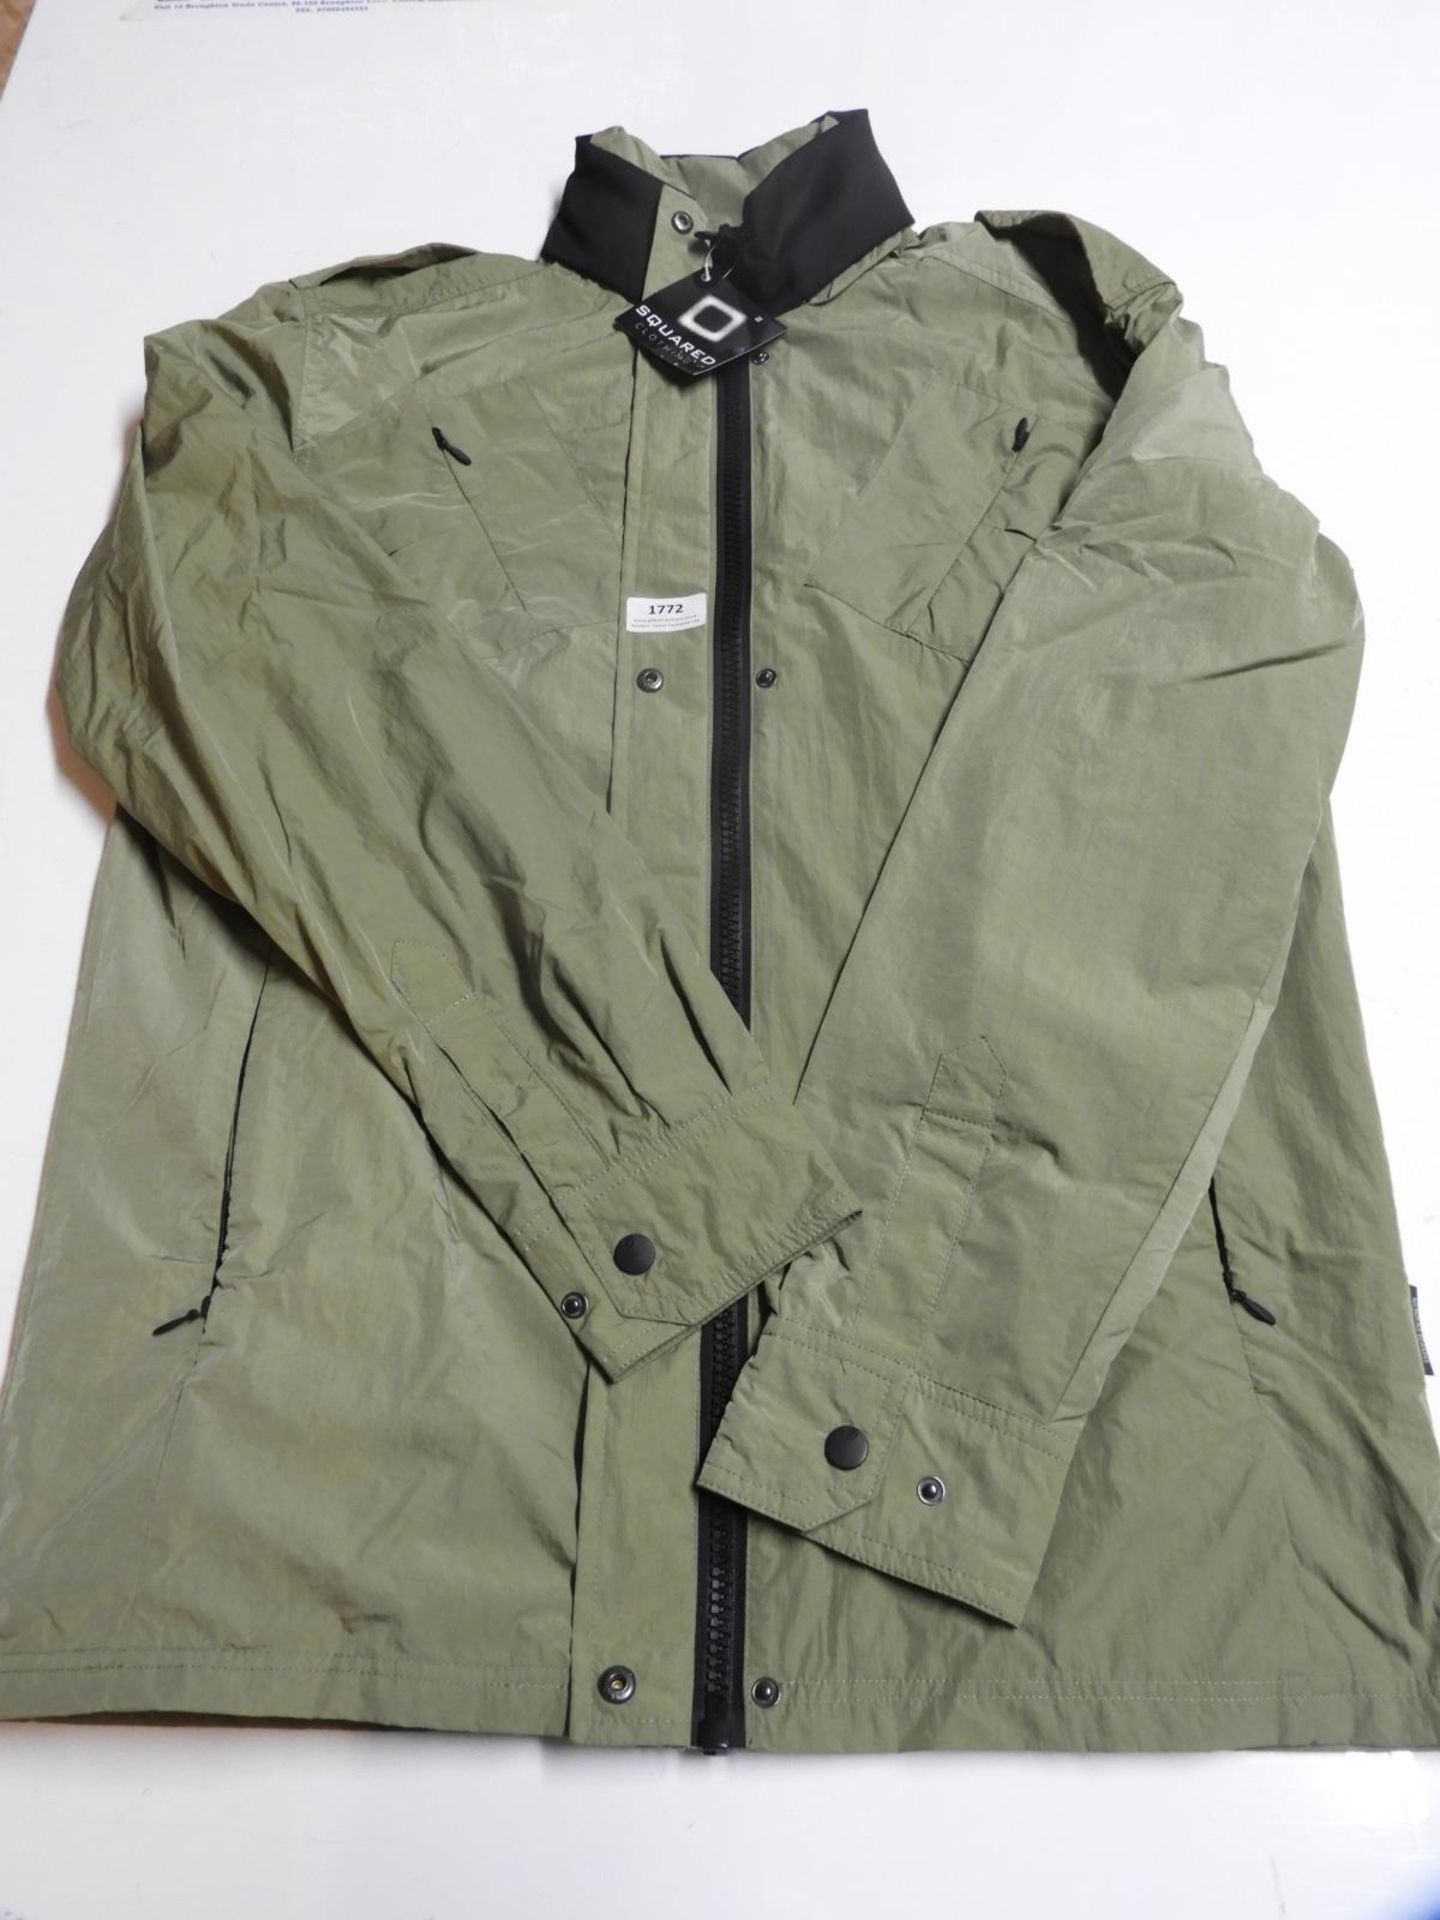 *Nicholas Deakins Unit AND Jacket Size: Small